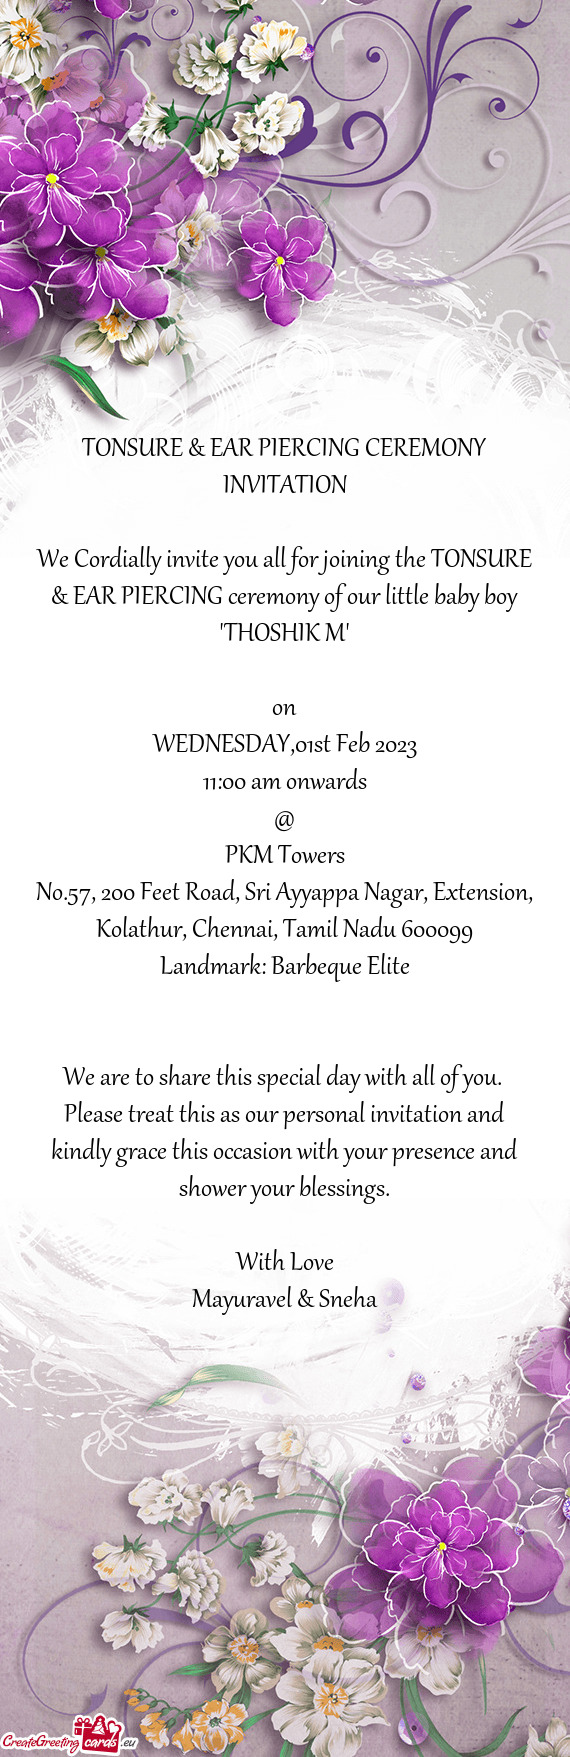 We Cordially invite you all for joining the TONSURE & EAR PIERCING ceremony of our little baby boy "